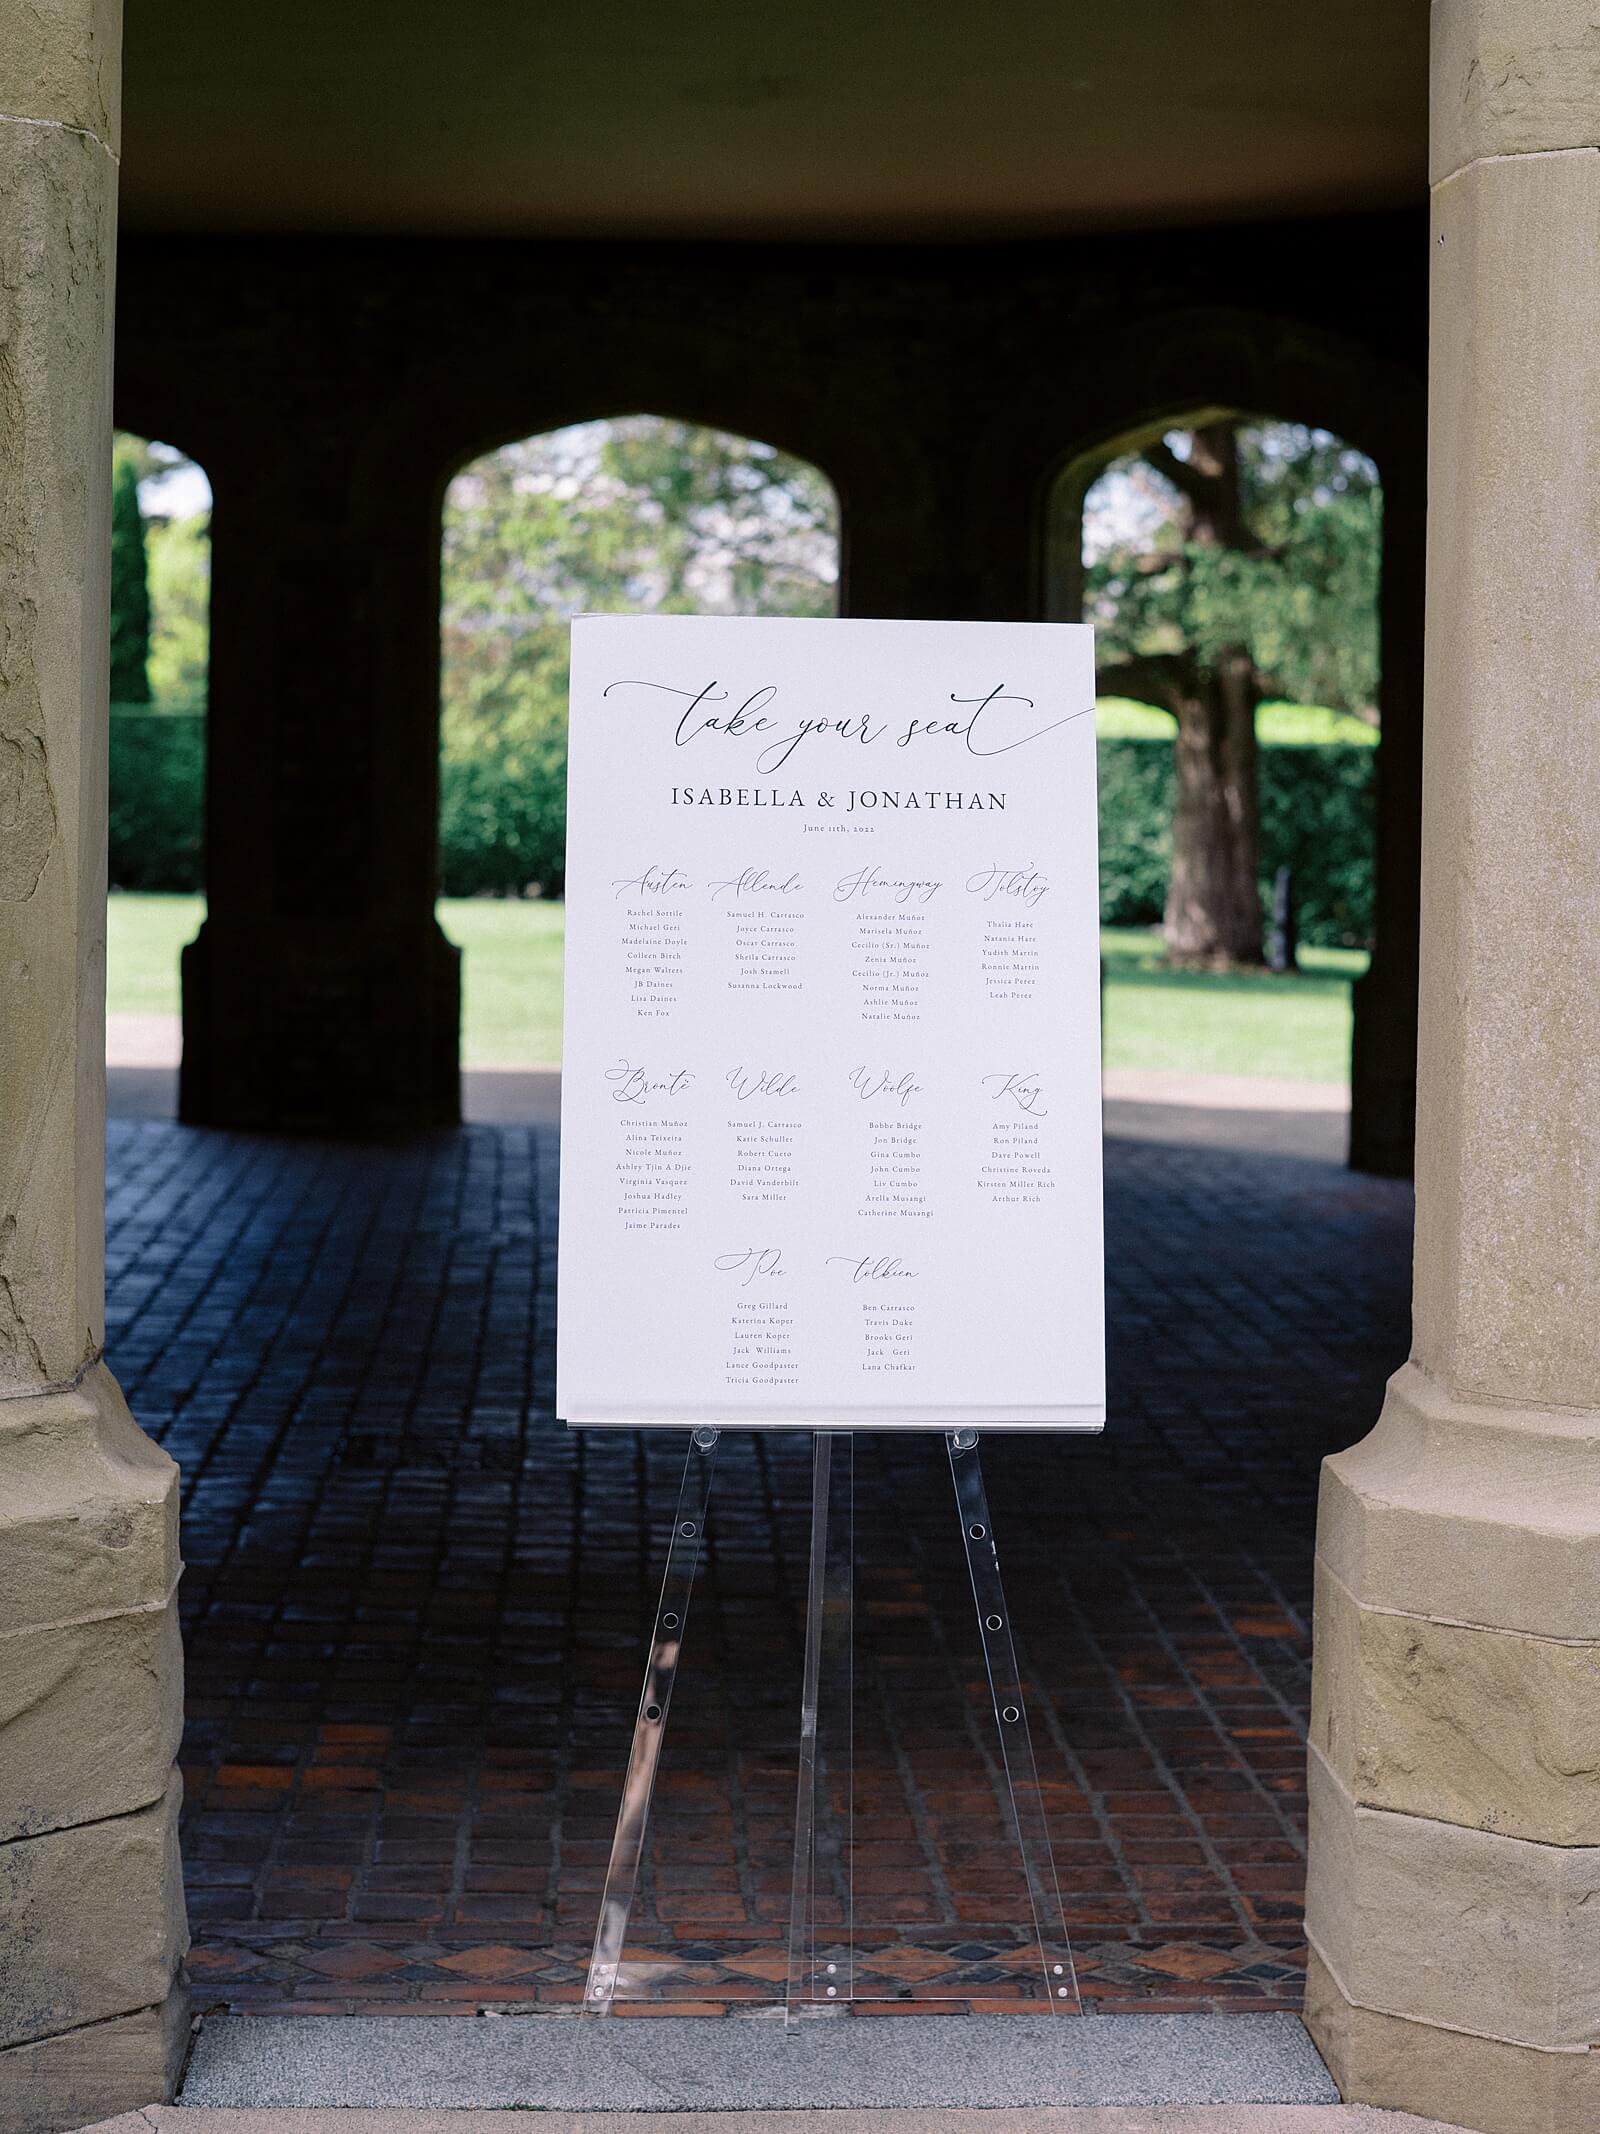 Take your seat escort sign for wedding reception at Thornewood Castle - Jacqueline Benét Photography